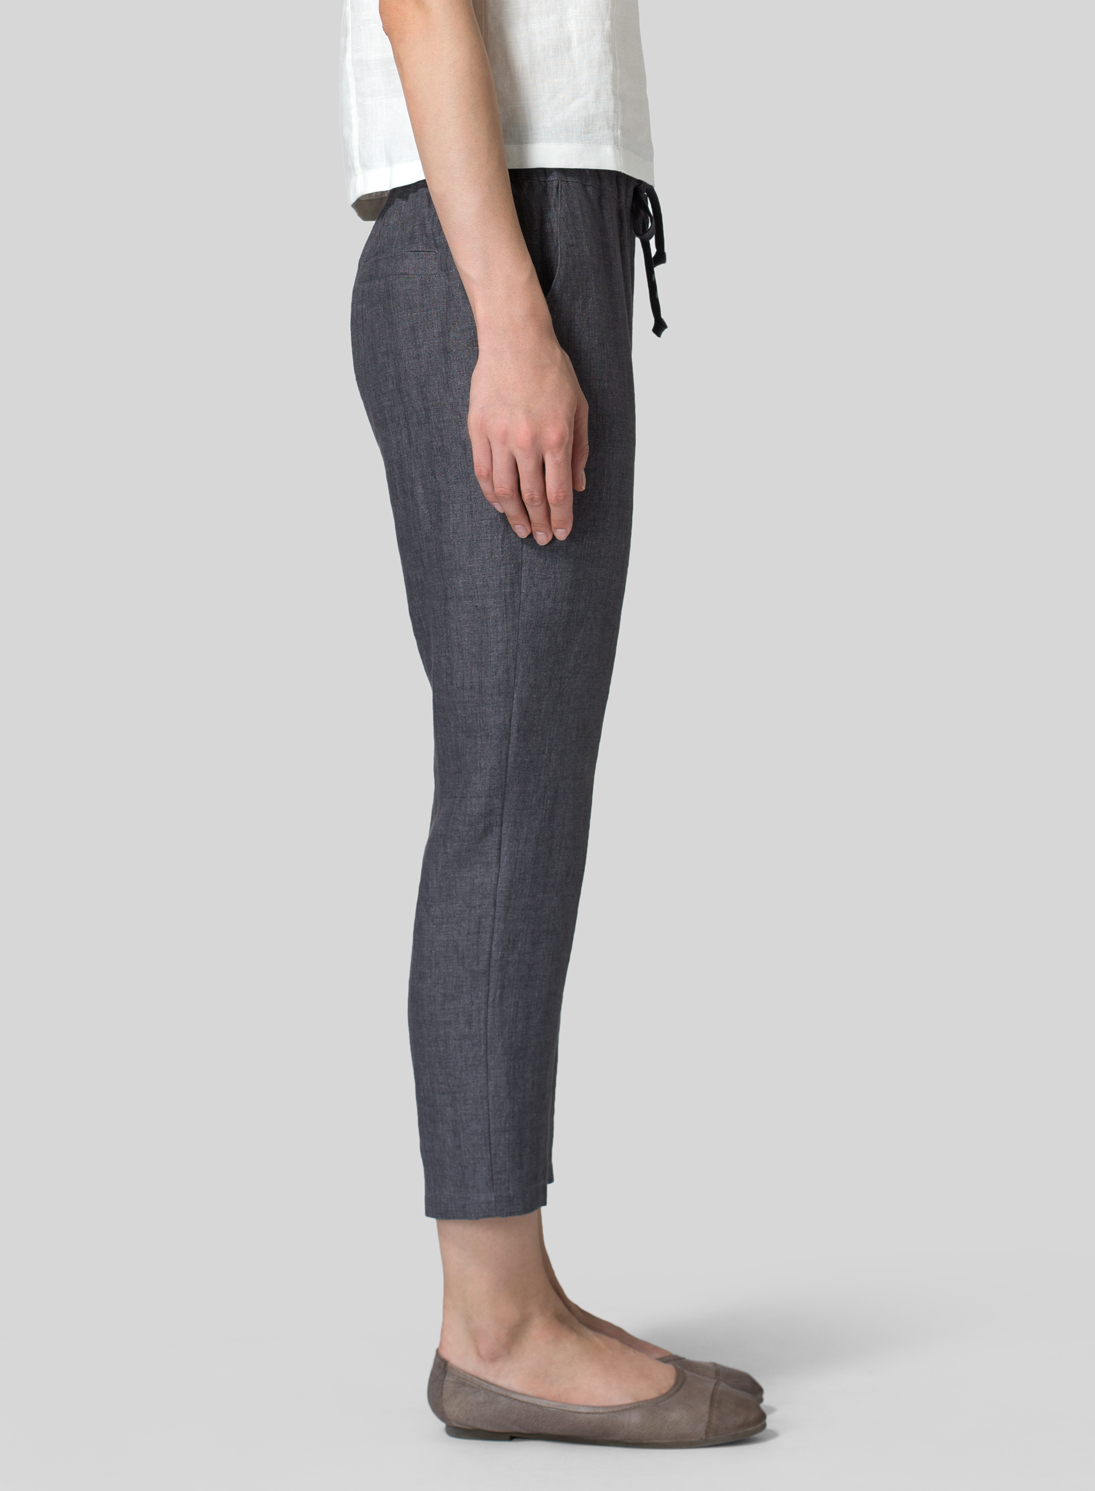 Alternative low rise linen pants with a fly zip (not a drawstring)? :  r/findfashion